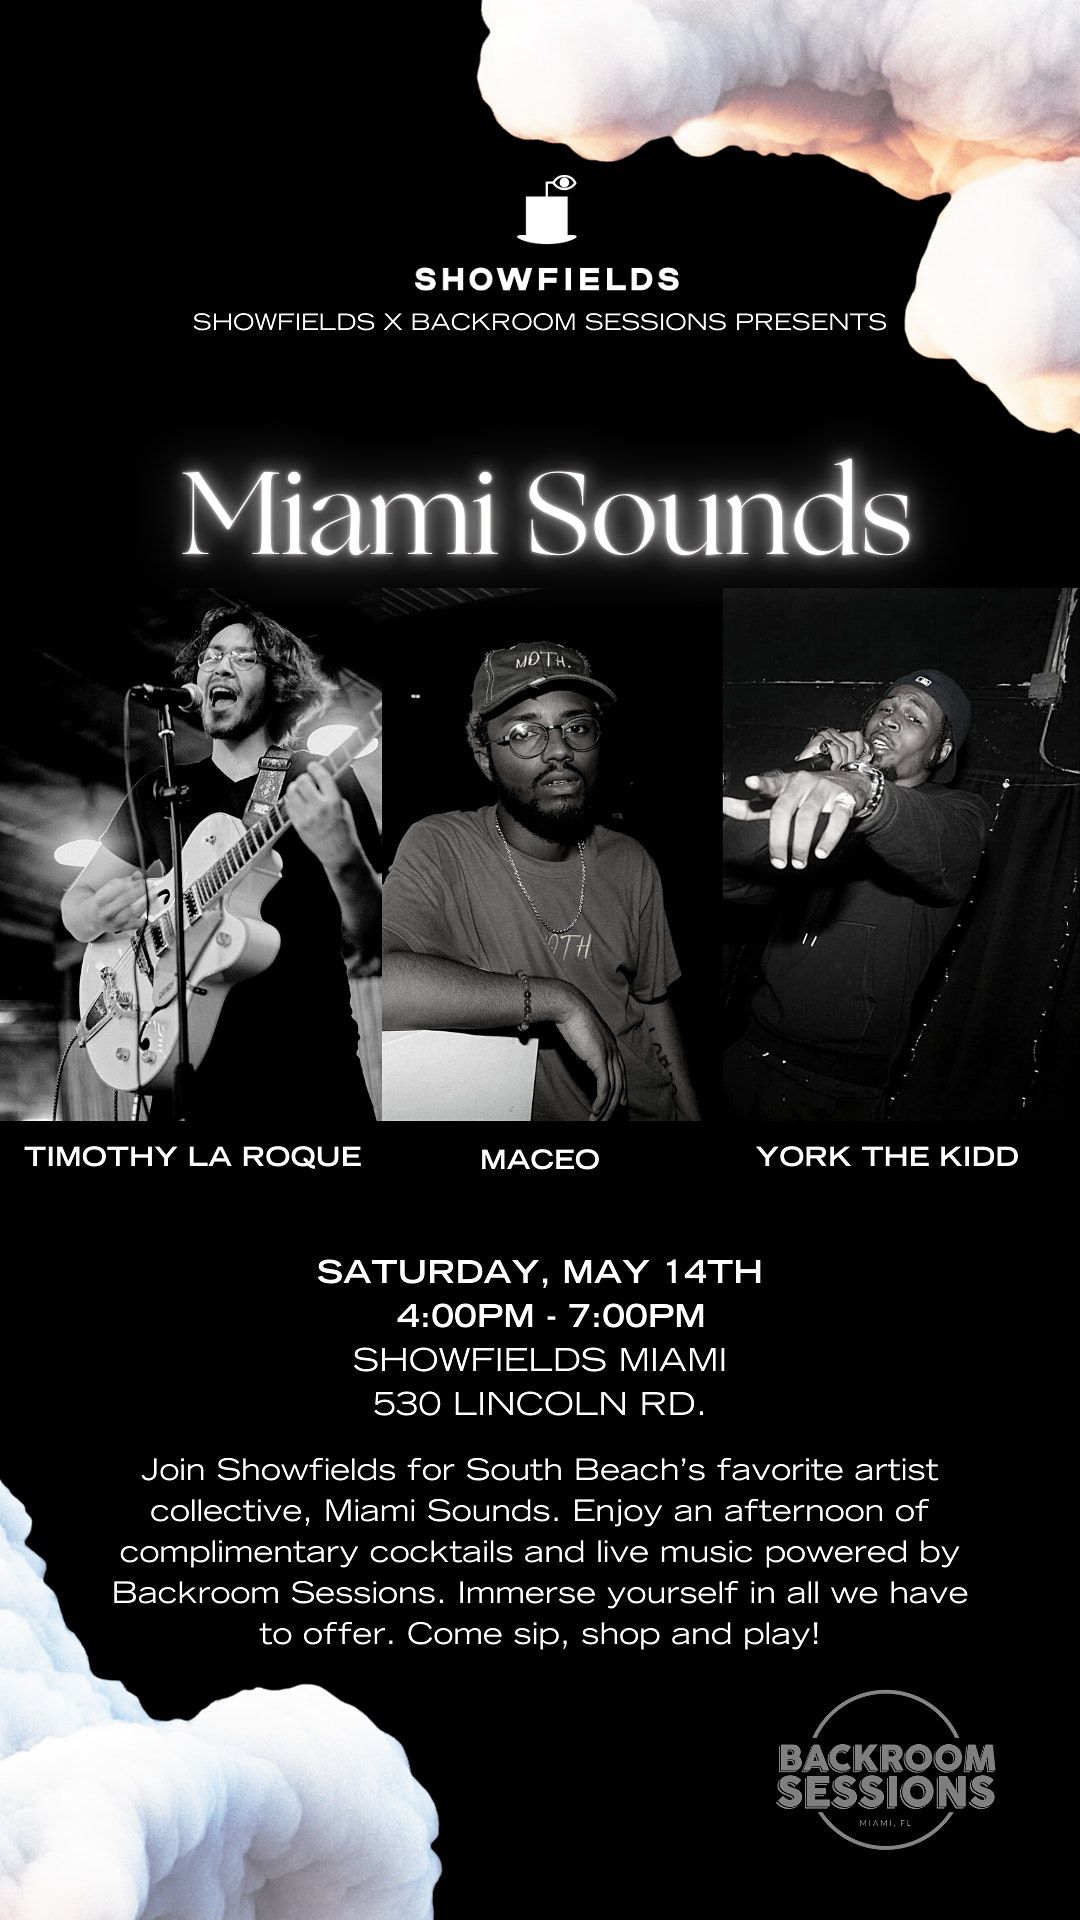 Showfields x Backroom Sessions Presents: Miami Sounds